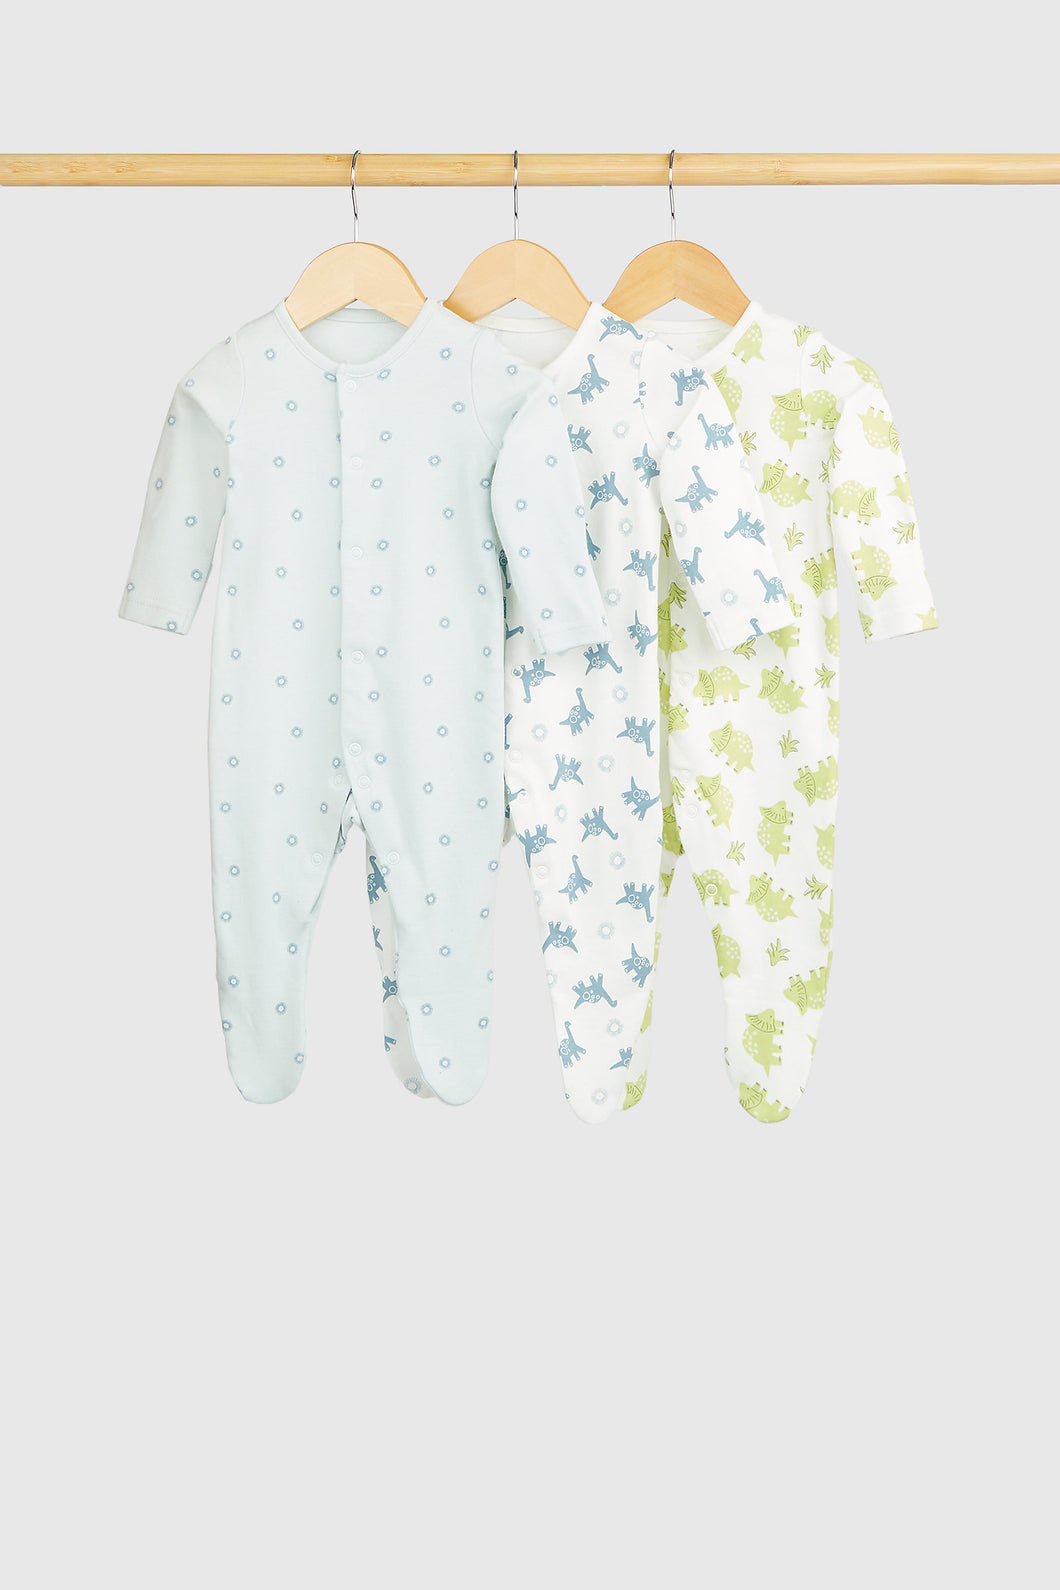 Mothercare Dinosaur Baby Sleepsuits - 3 Pack